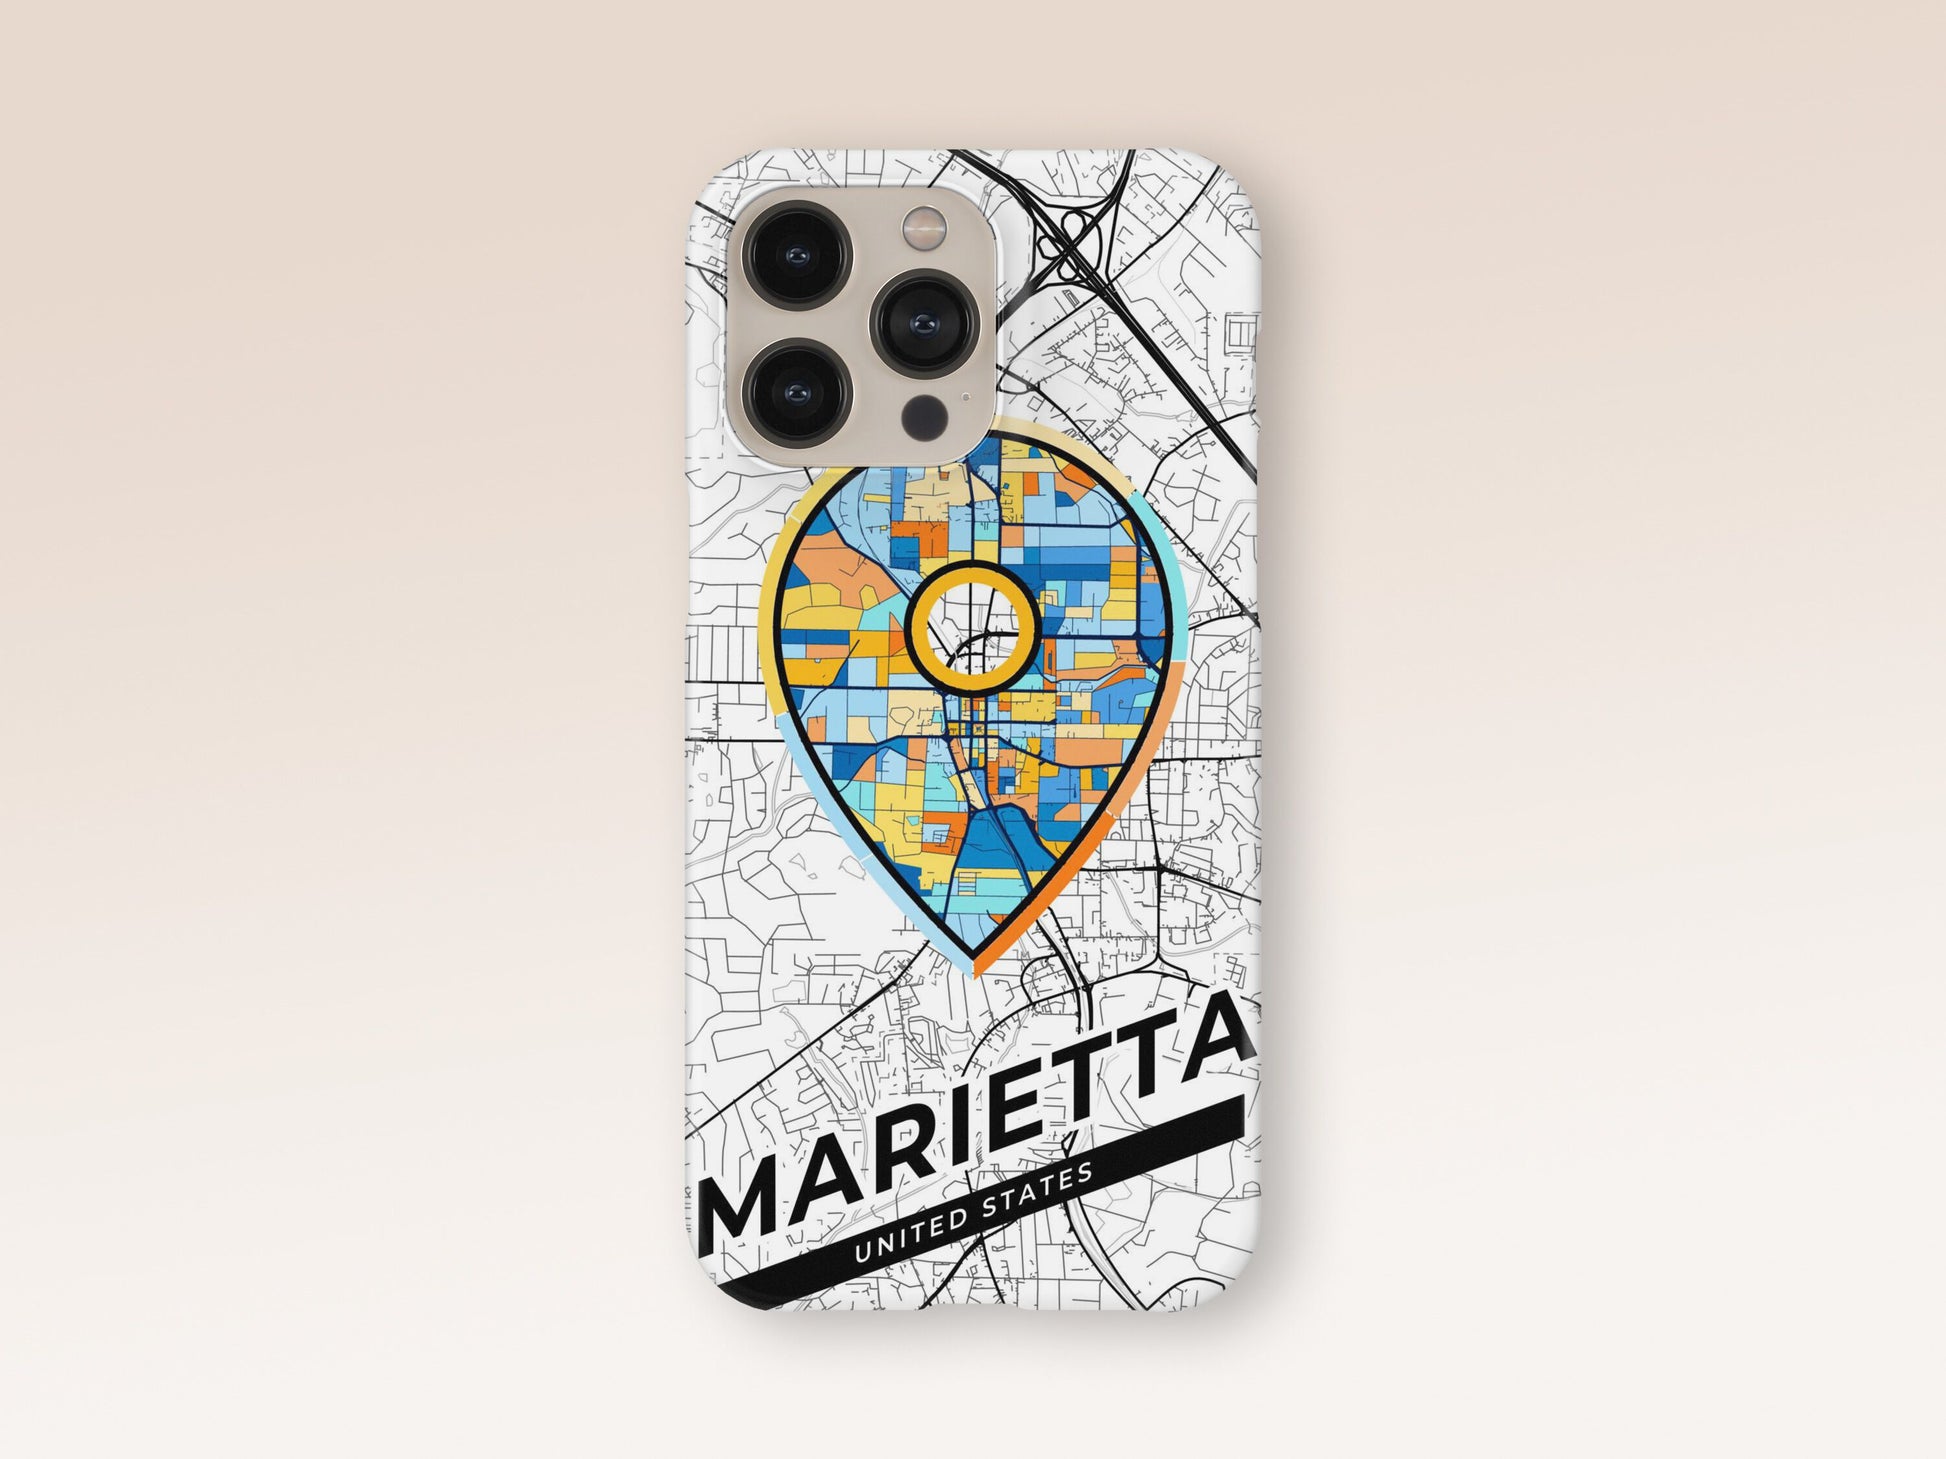 Marietta Georgia slim phone case with colorful icon. Birthday, wedding or housewarming gift. Couple match cases. 1